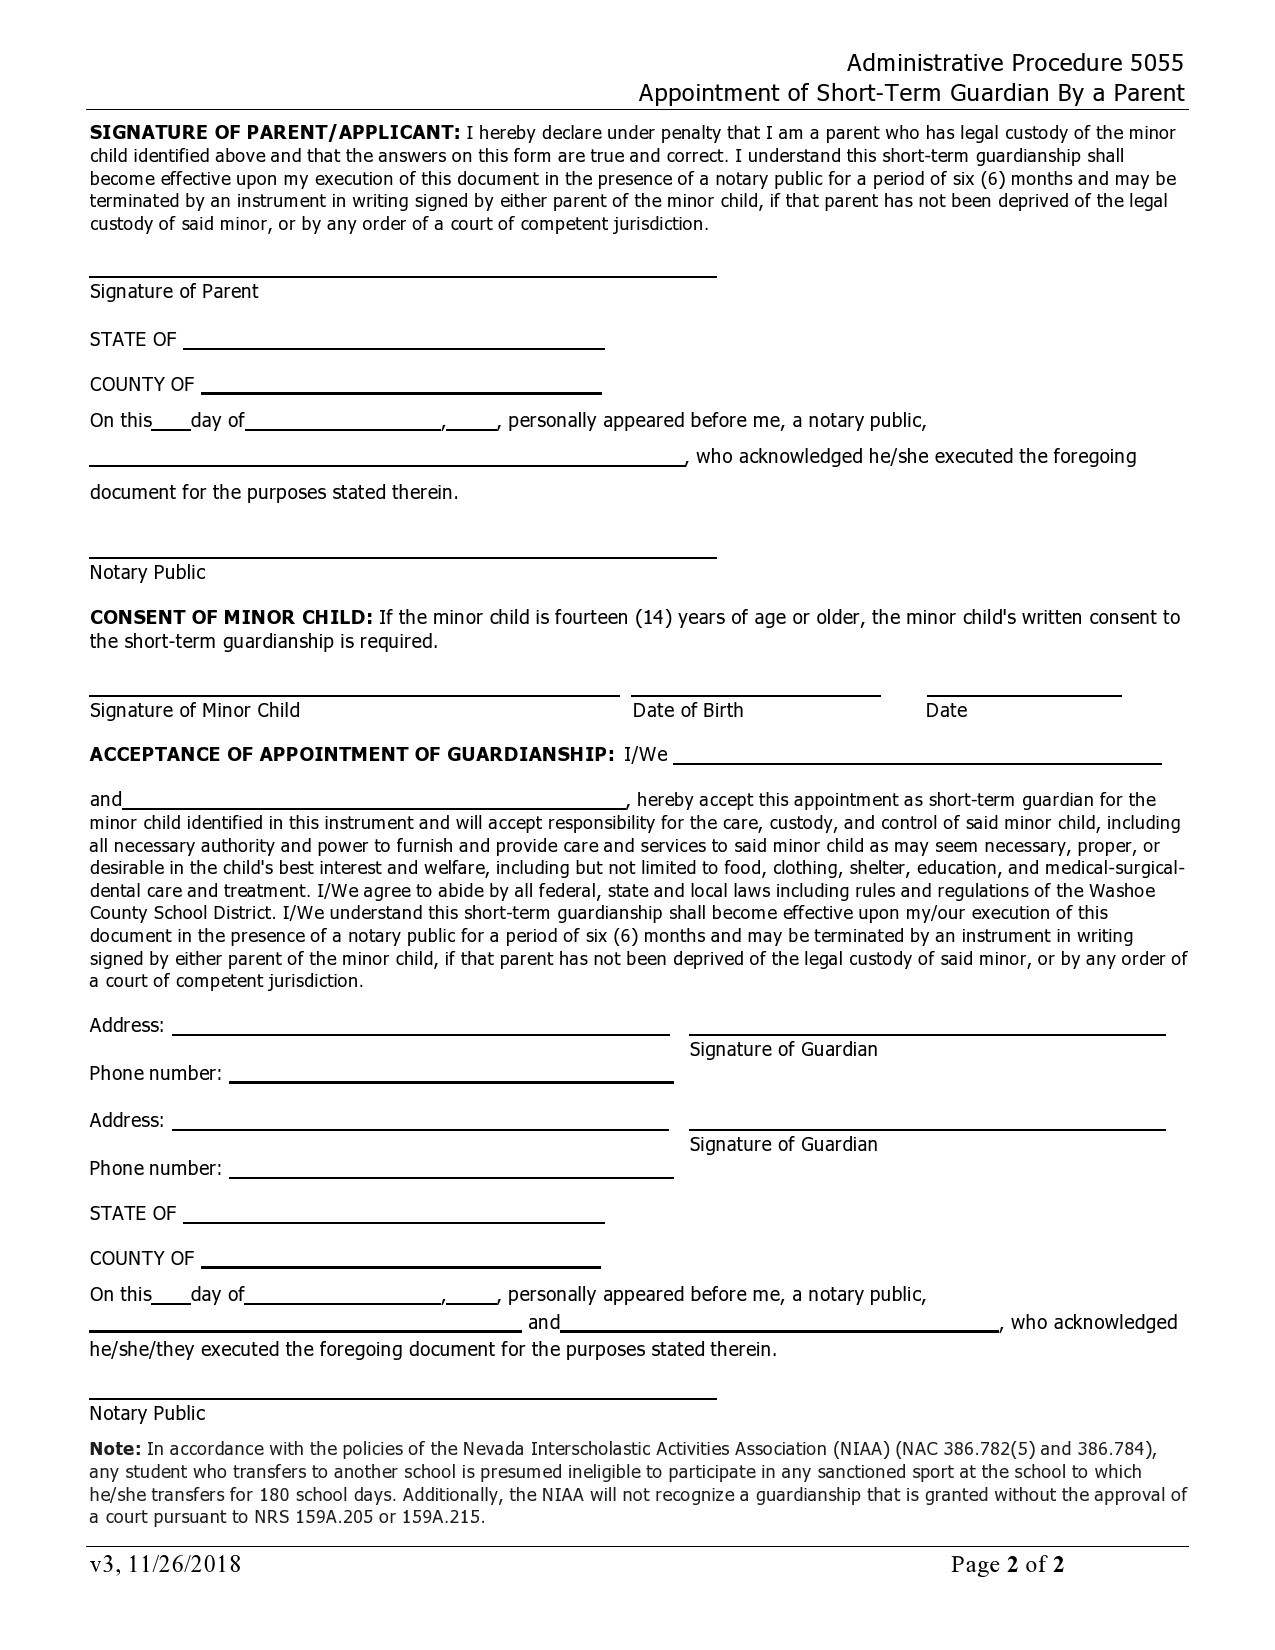 free-printable-temporary-guardianship-form-download